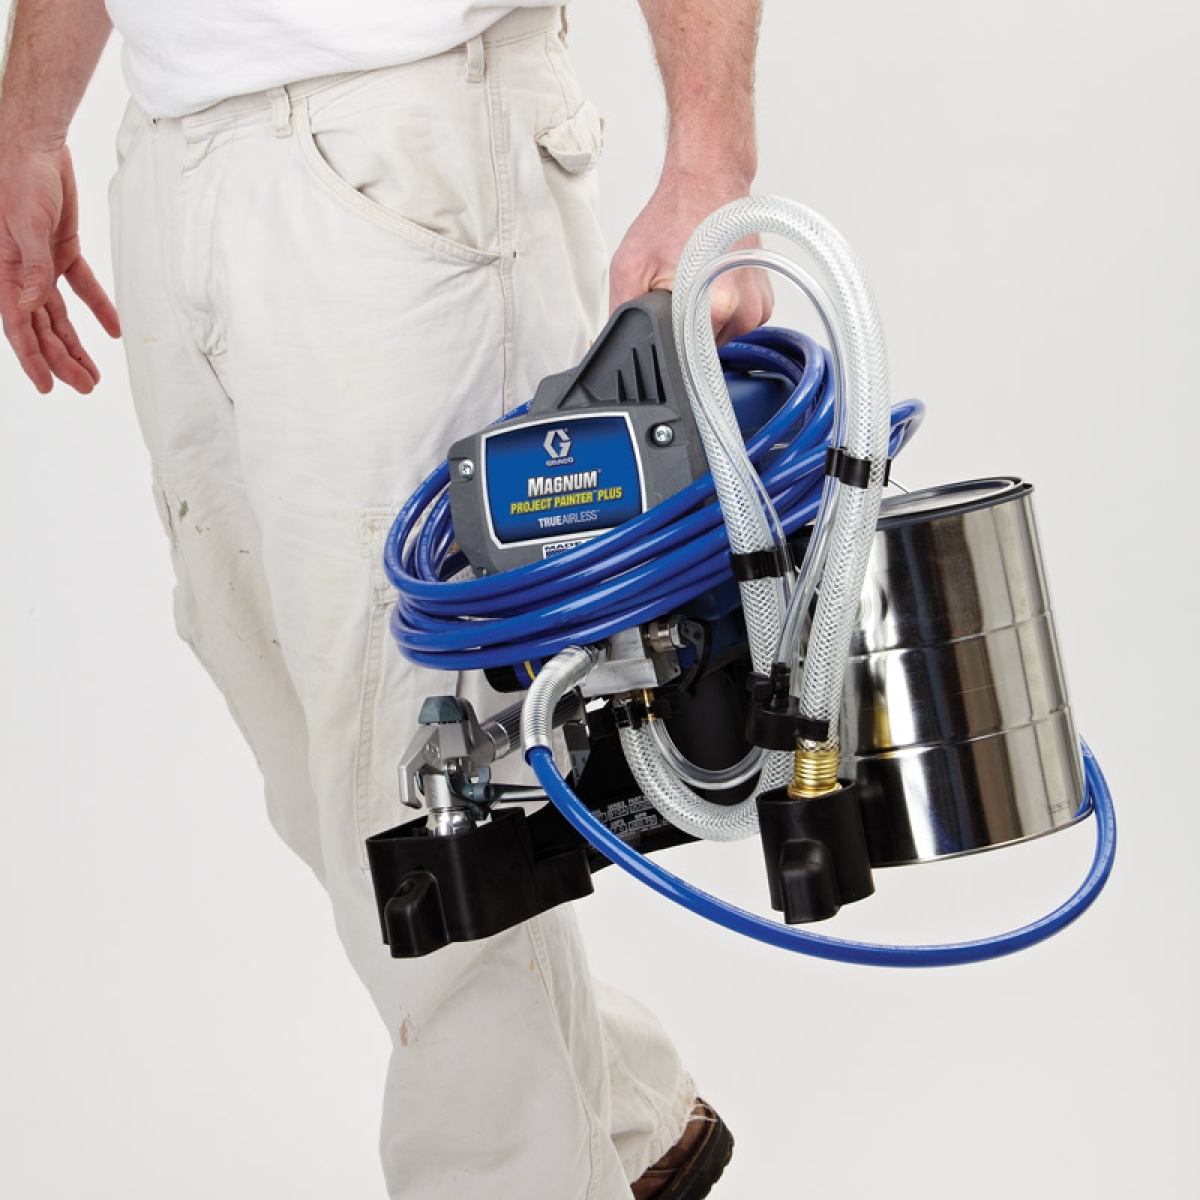 Graco Magnum Project Painter Plus Airless